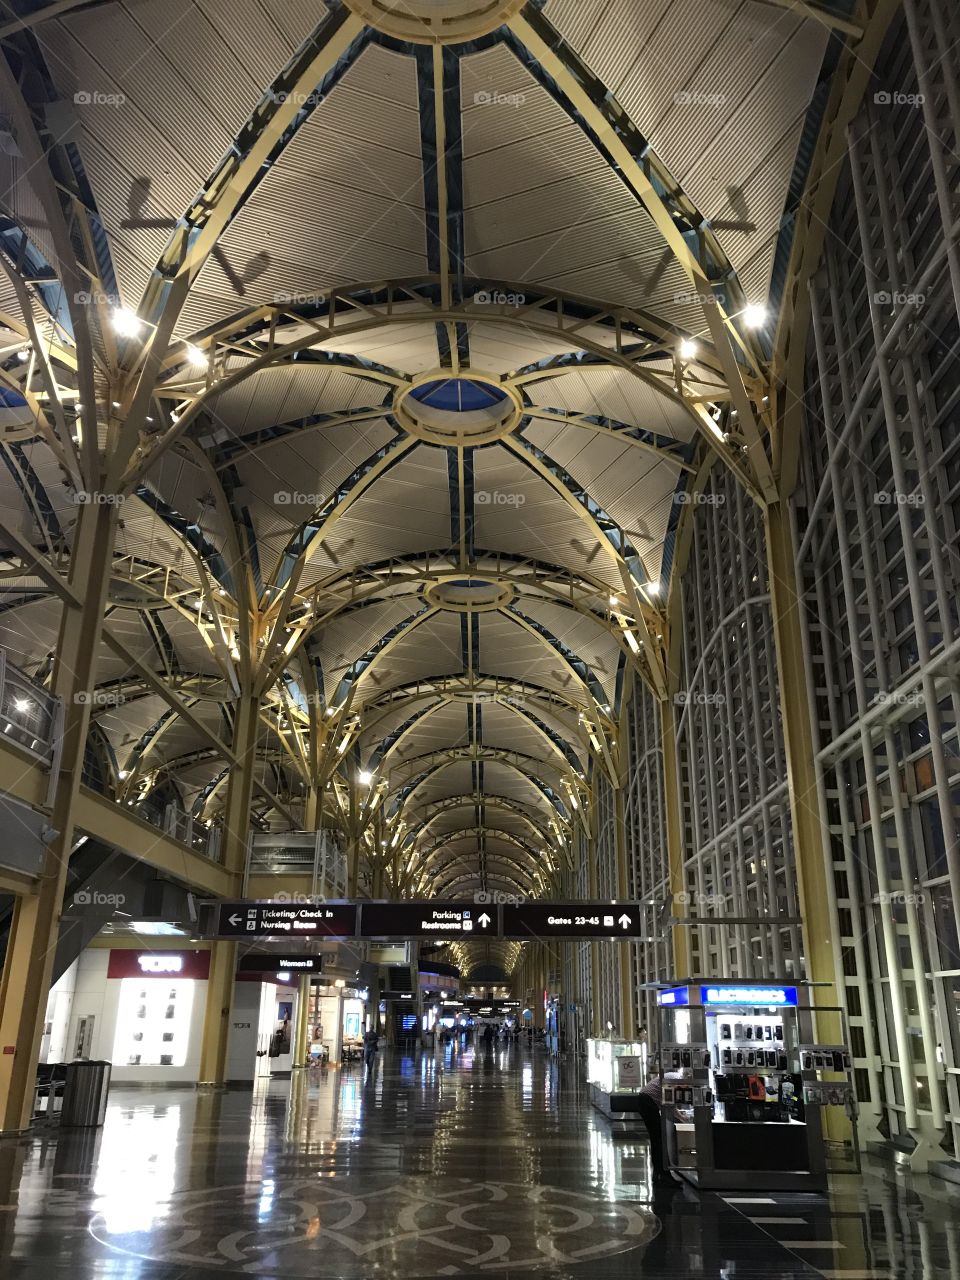 Welcome to Washington Reagan airport - very cool architecture for an airport- interesting 